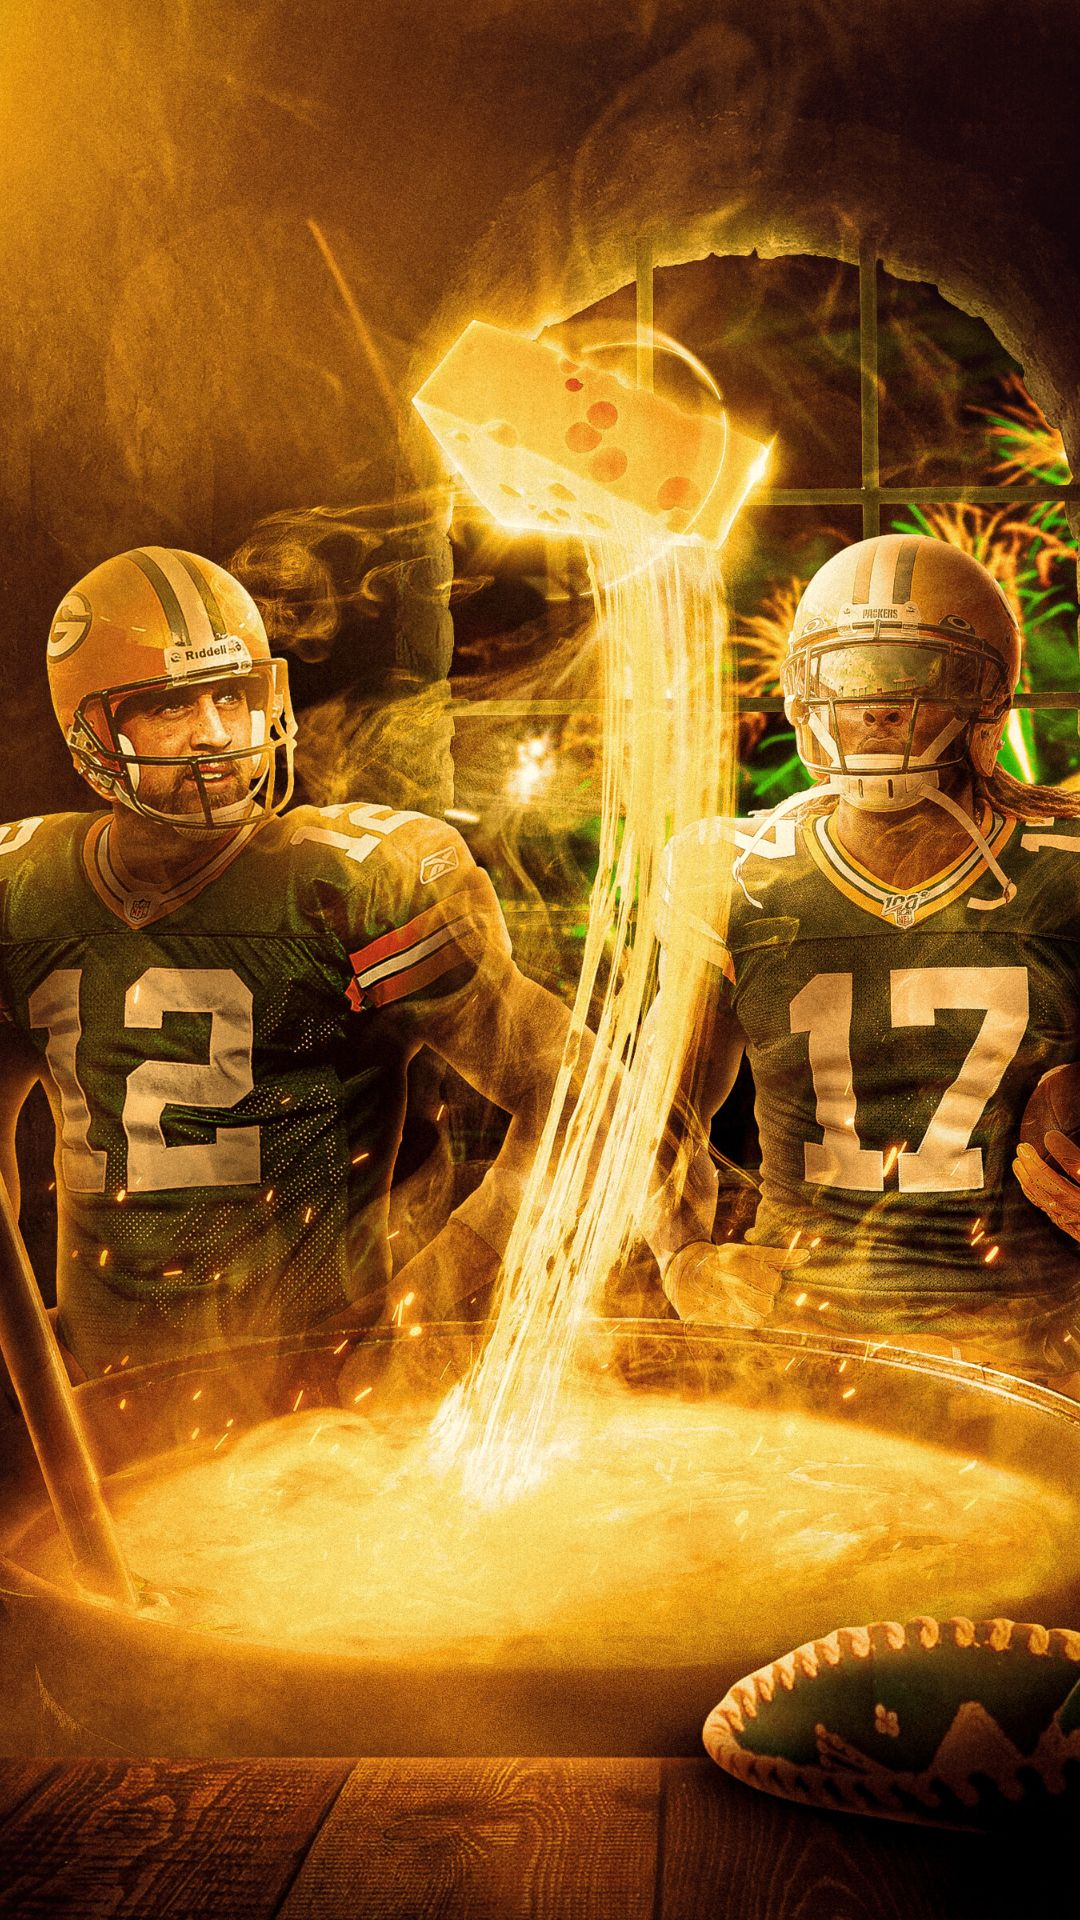 1080x1920 Green Bay Packers Wallpapers Top 25 Best Green Bay Packers Backgrounds Download